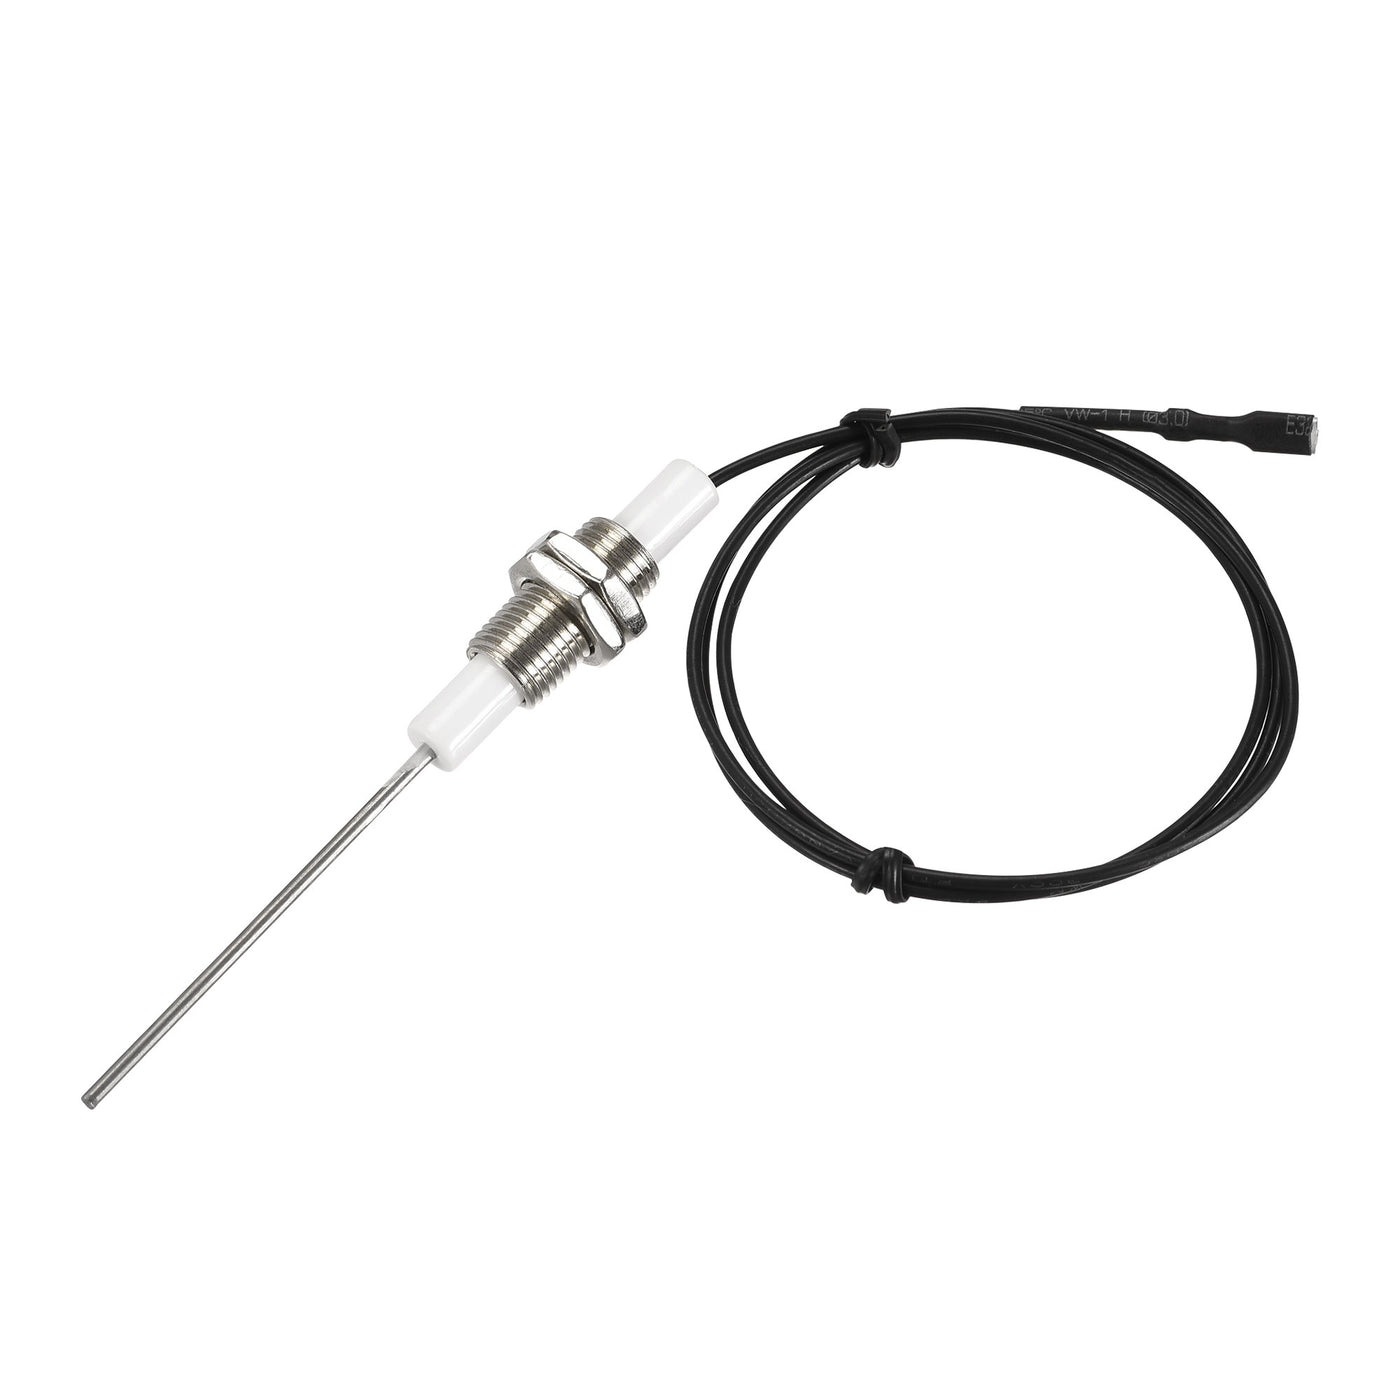 uxcell Uxcell Ignitor Wire Ceramic Electrode Assembly 600mm Length Gas Grill Ignitor Wire Ignition Electrode Replacement 3pcs